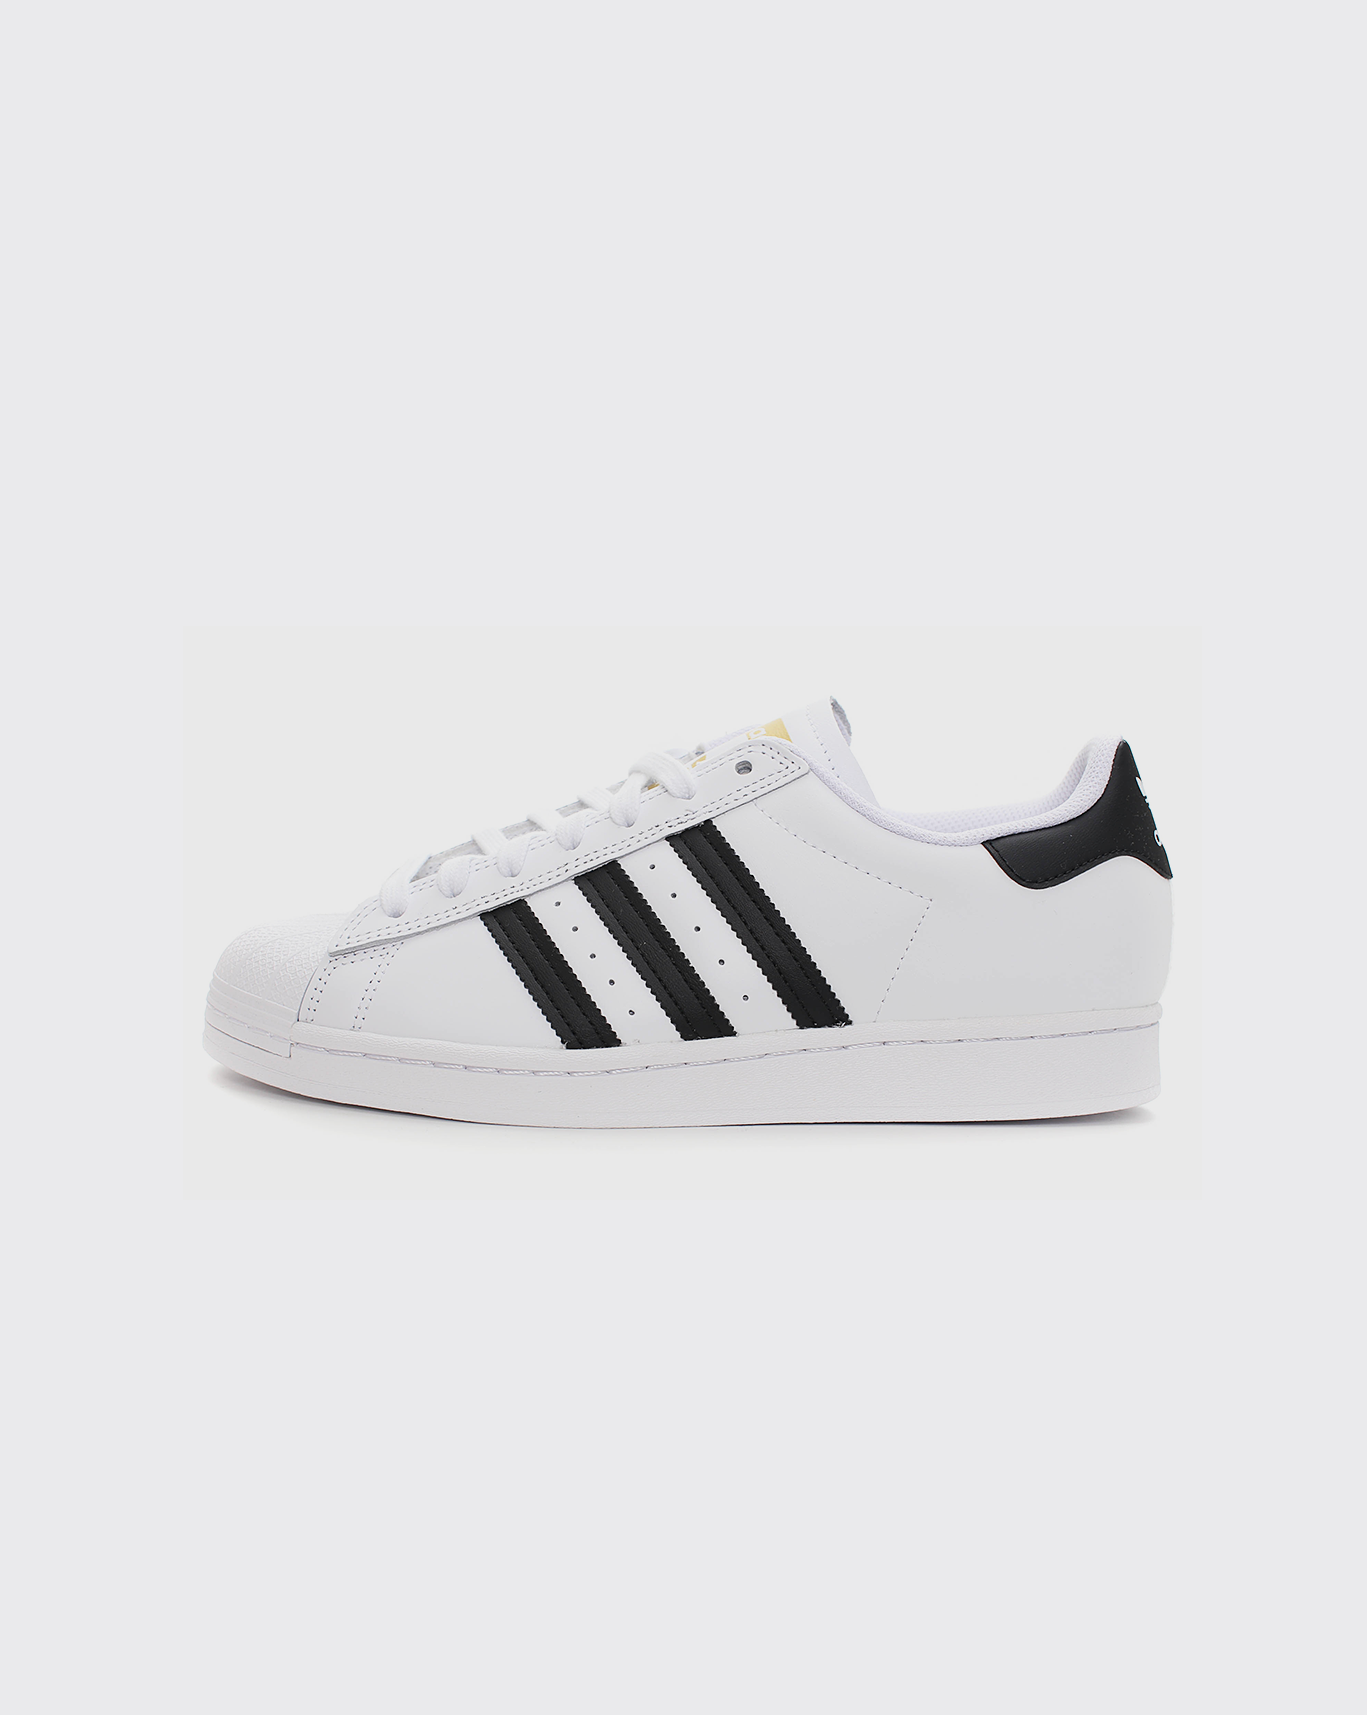 Adidas Superstar Men's Cloud White Low Top Sneakers, Brand Size 4 FX5534 -  Shoes, Superstar - Jomashop